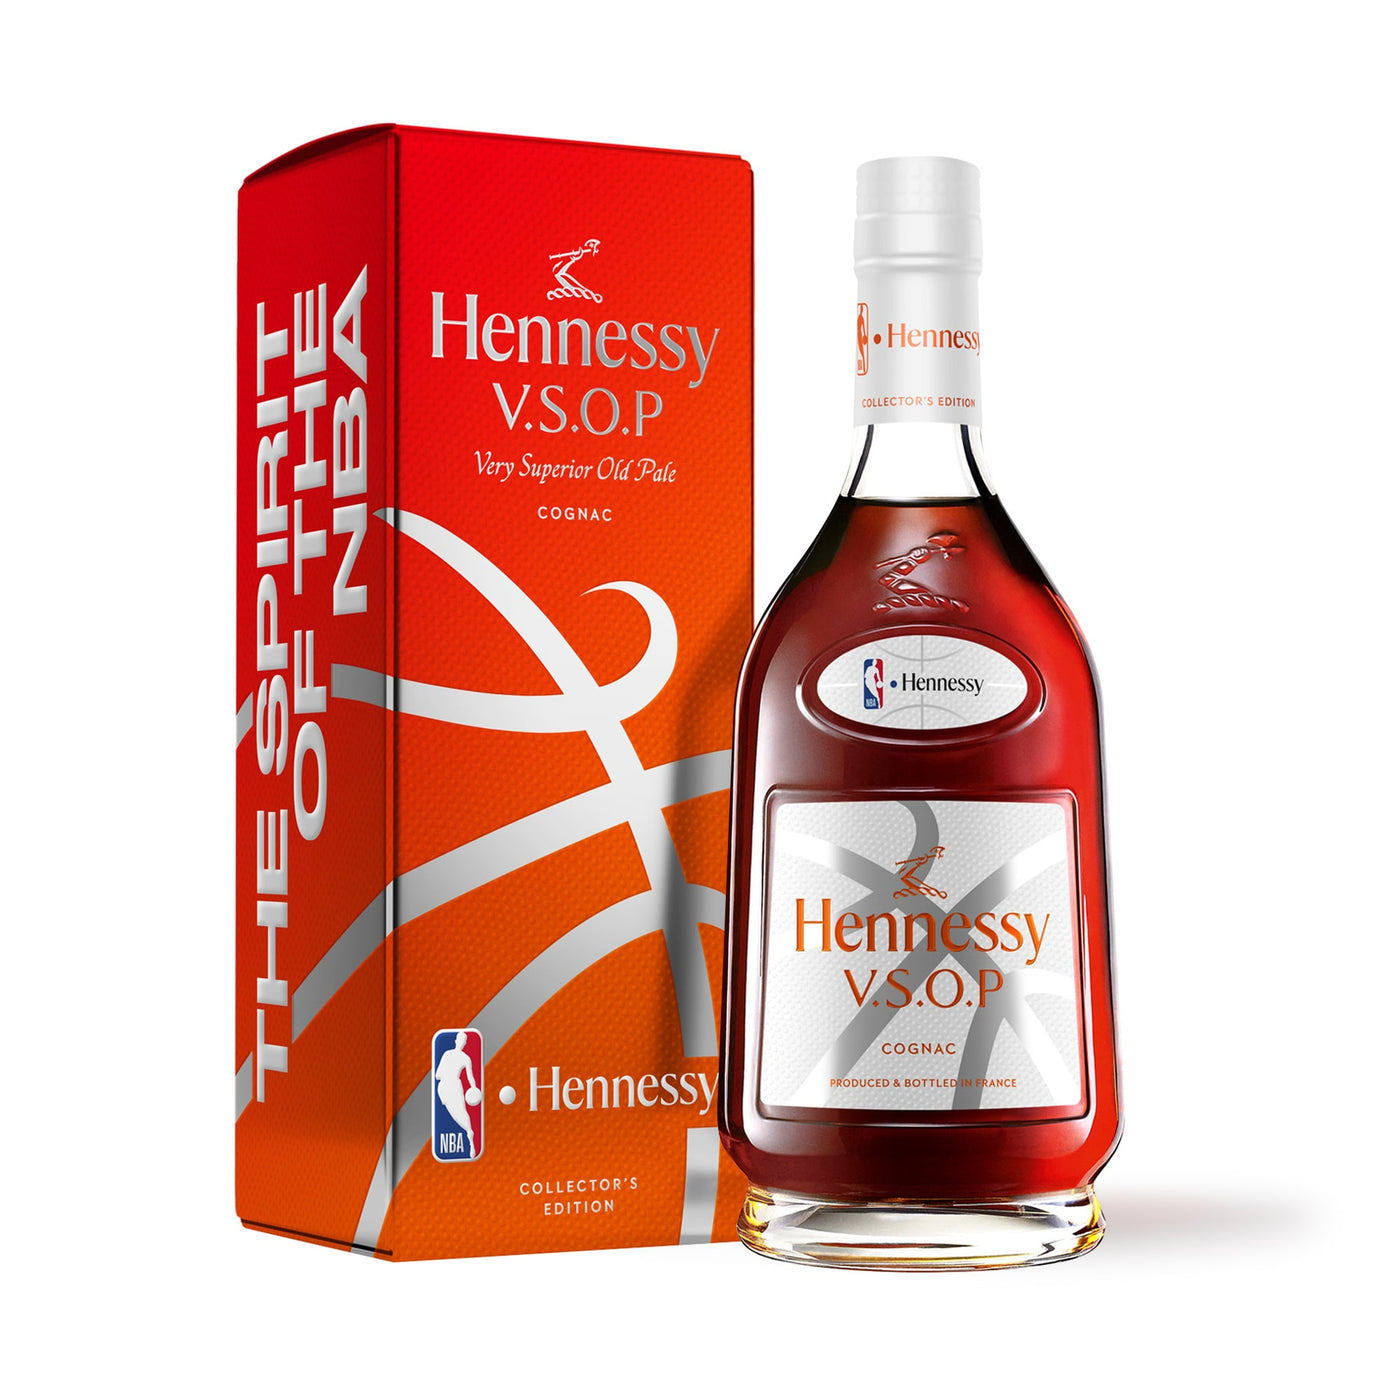 Hennessy Vsop NBA Limited Edition